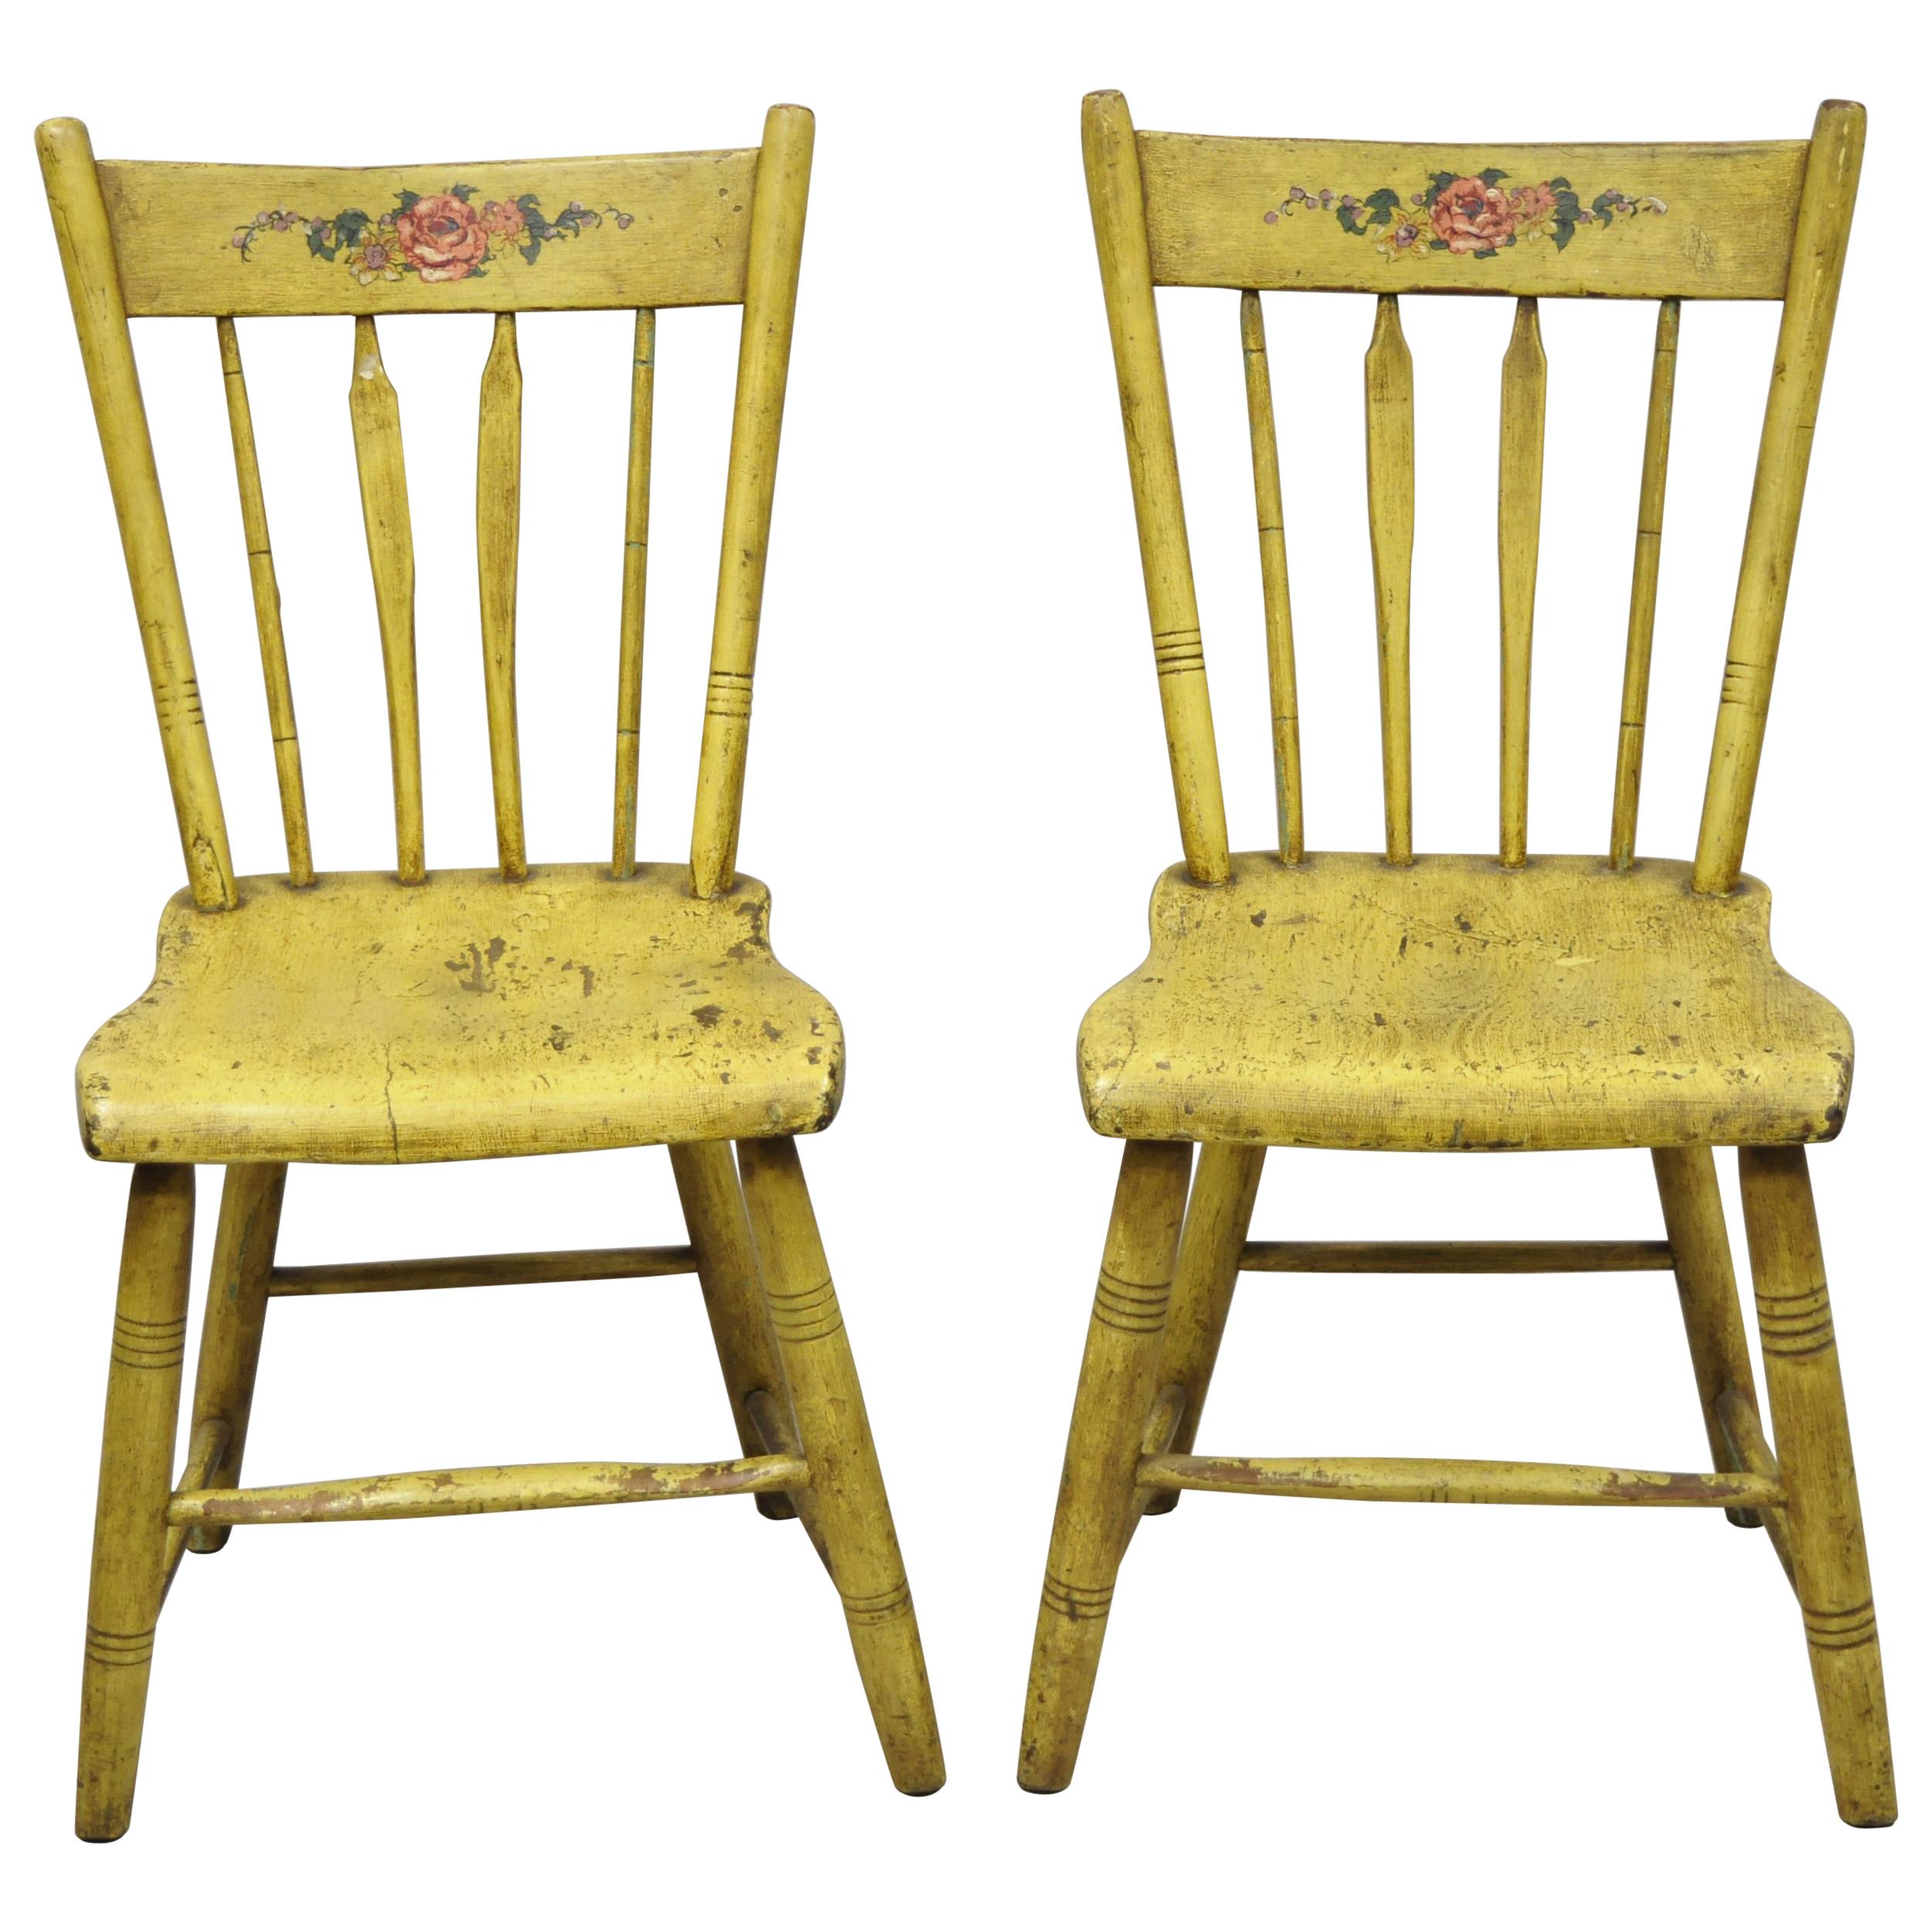 Frederick Loeser & Co Yellow Primitive Hitchcock Style Side Chairs, Pair 'A' For Sale